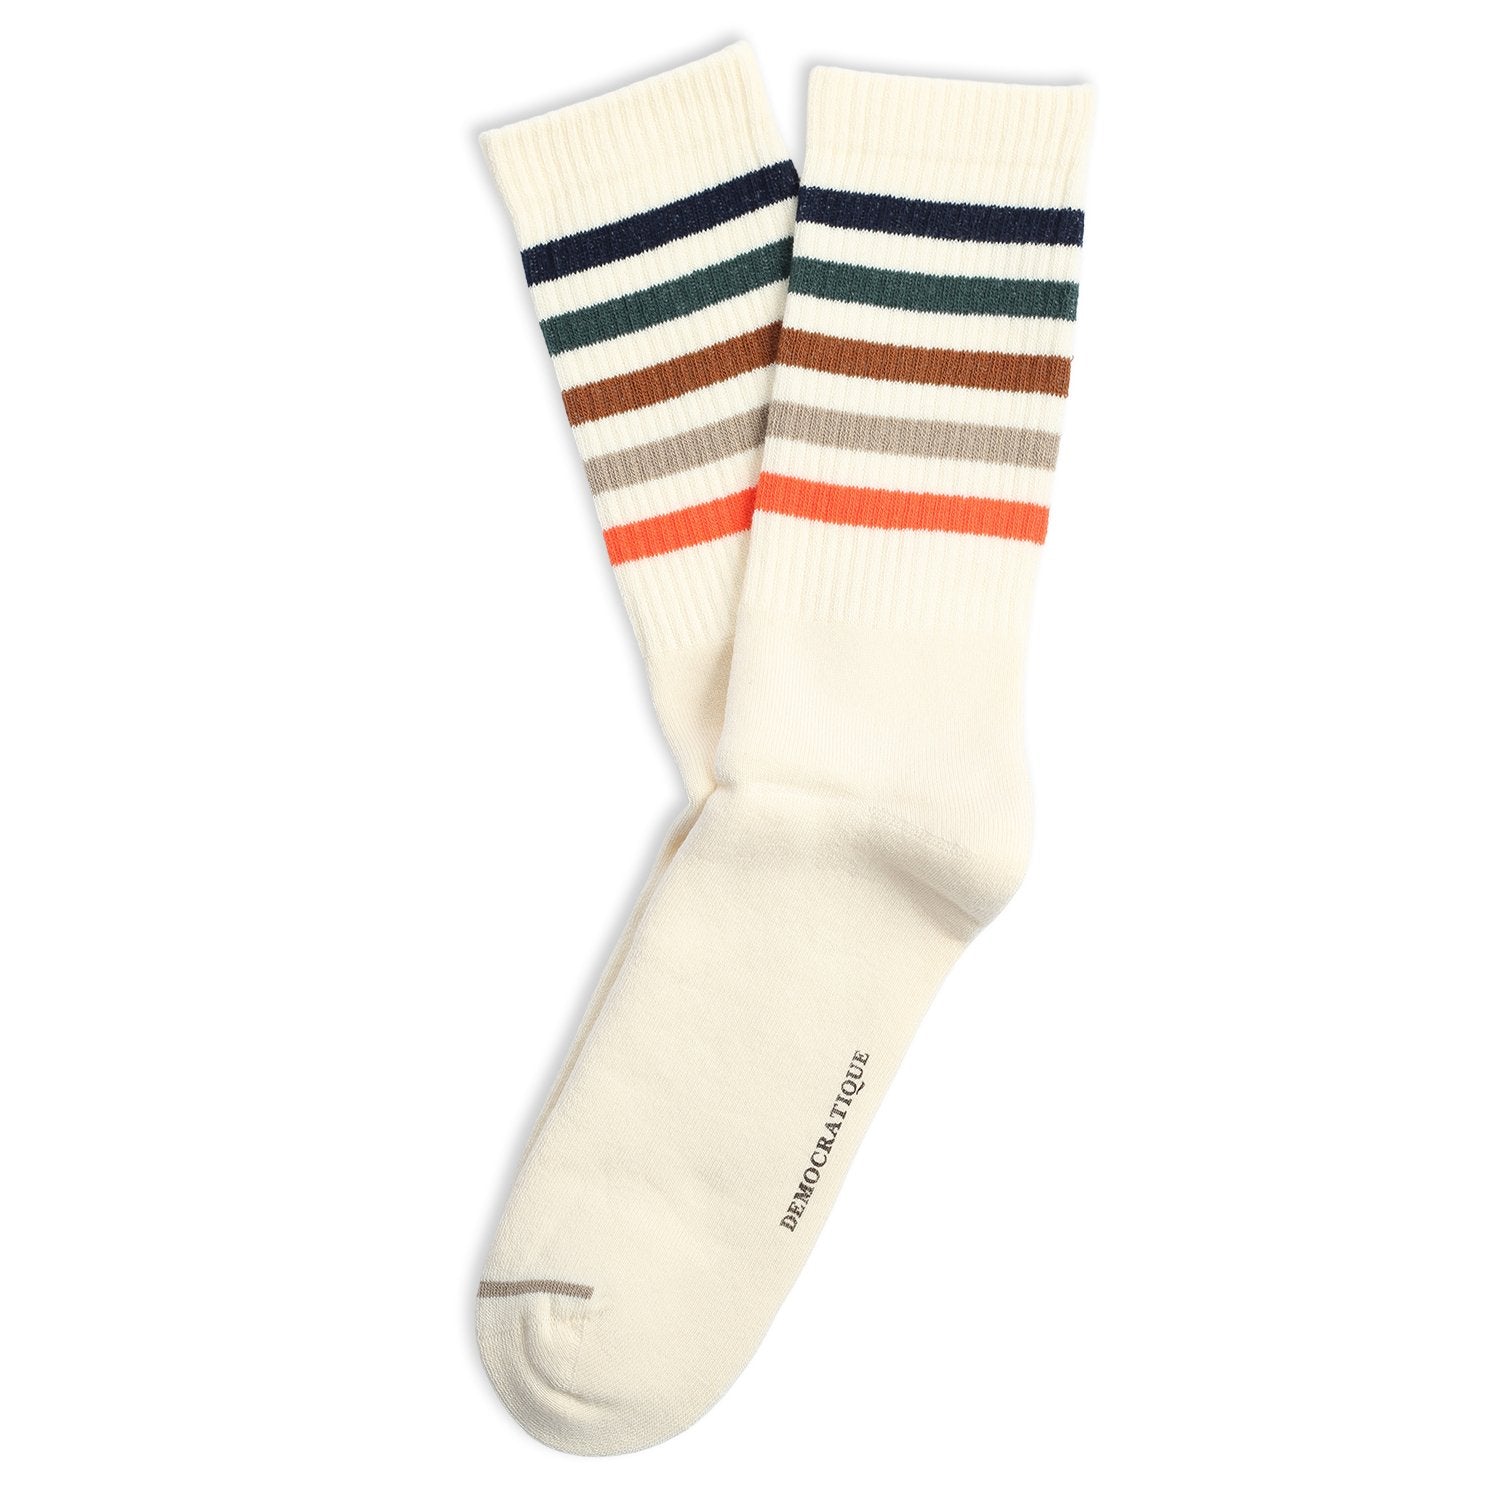 Specialized Soft Air Invisible Socks - Bikeland